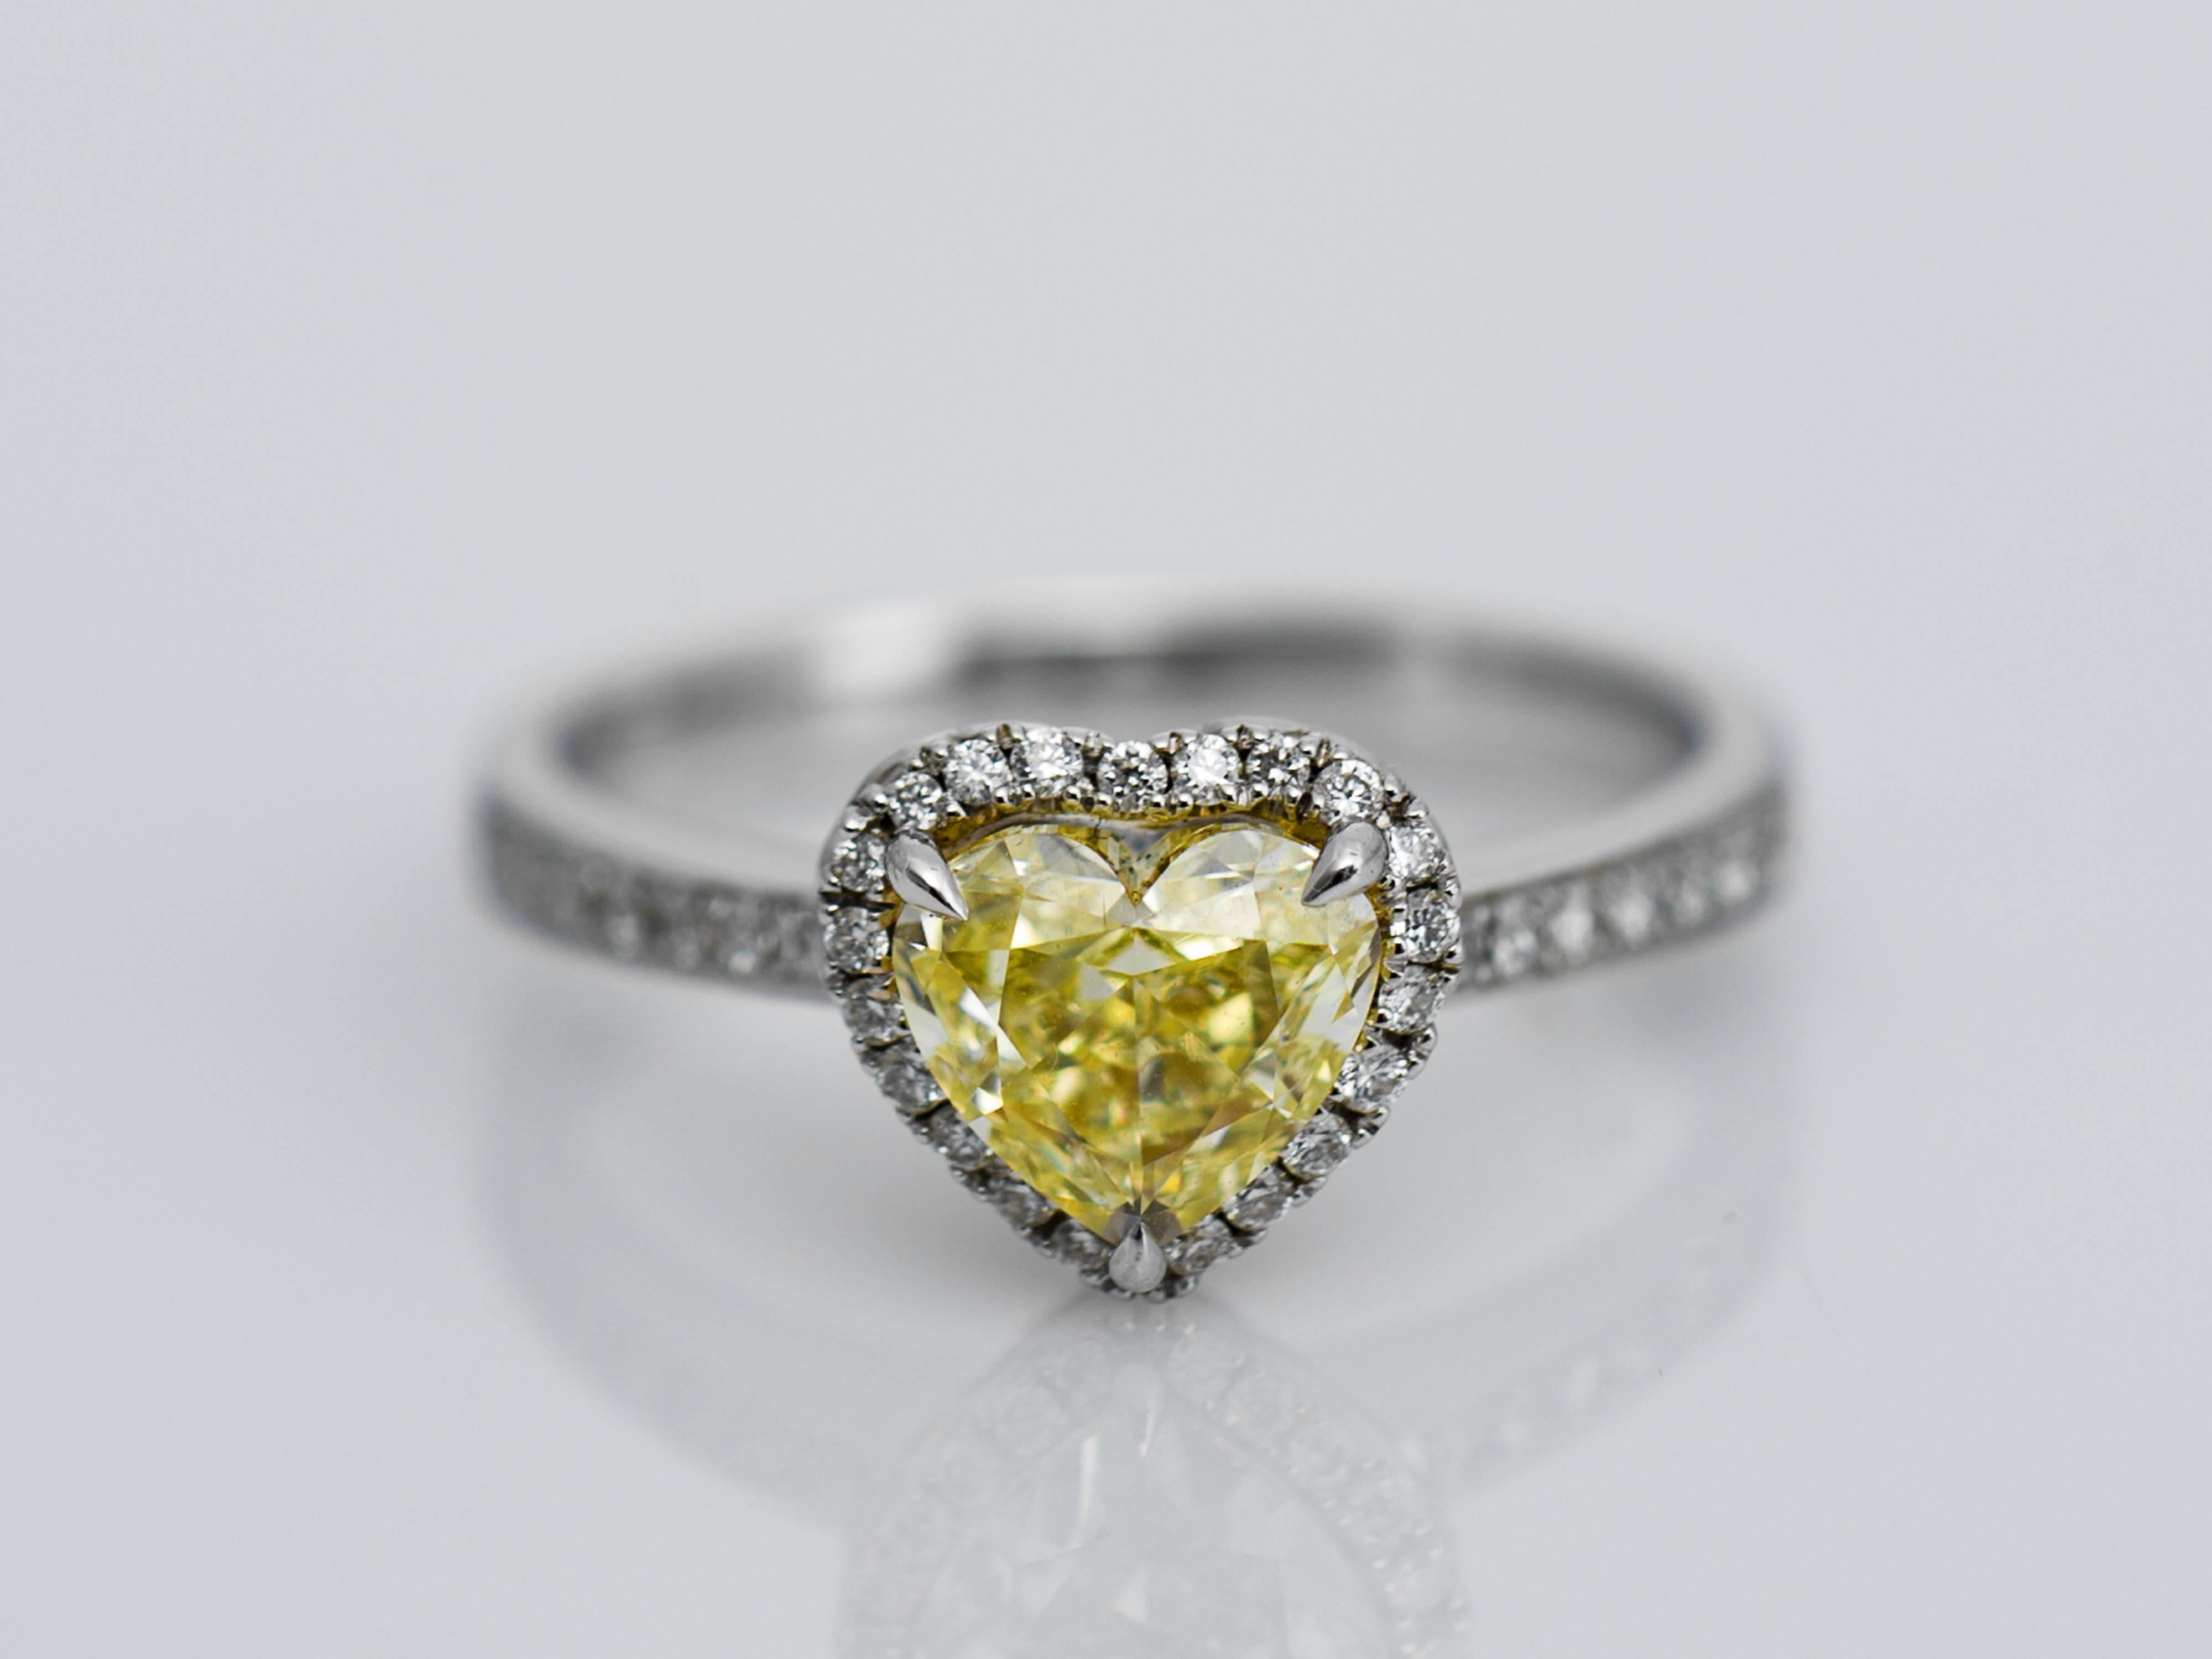 The delicately handmade MIIORI ring features a fancy yellow brilliant cut heart shaped diamond weighing 1.13 carats in the centre of the ring, bordered by 67 small pavé-set diamonds, mounted in solid 18k white gold. This ring is absolutely elegant